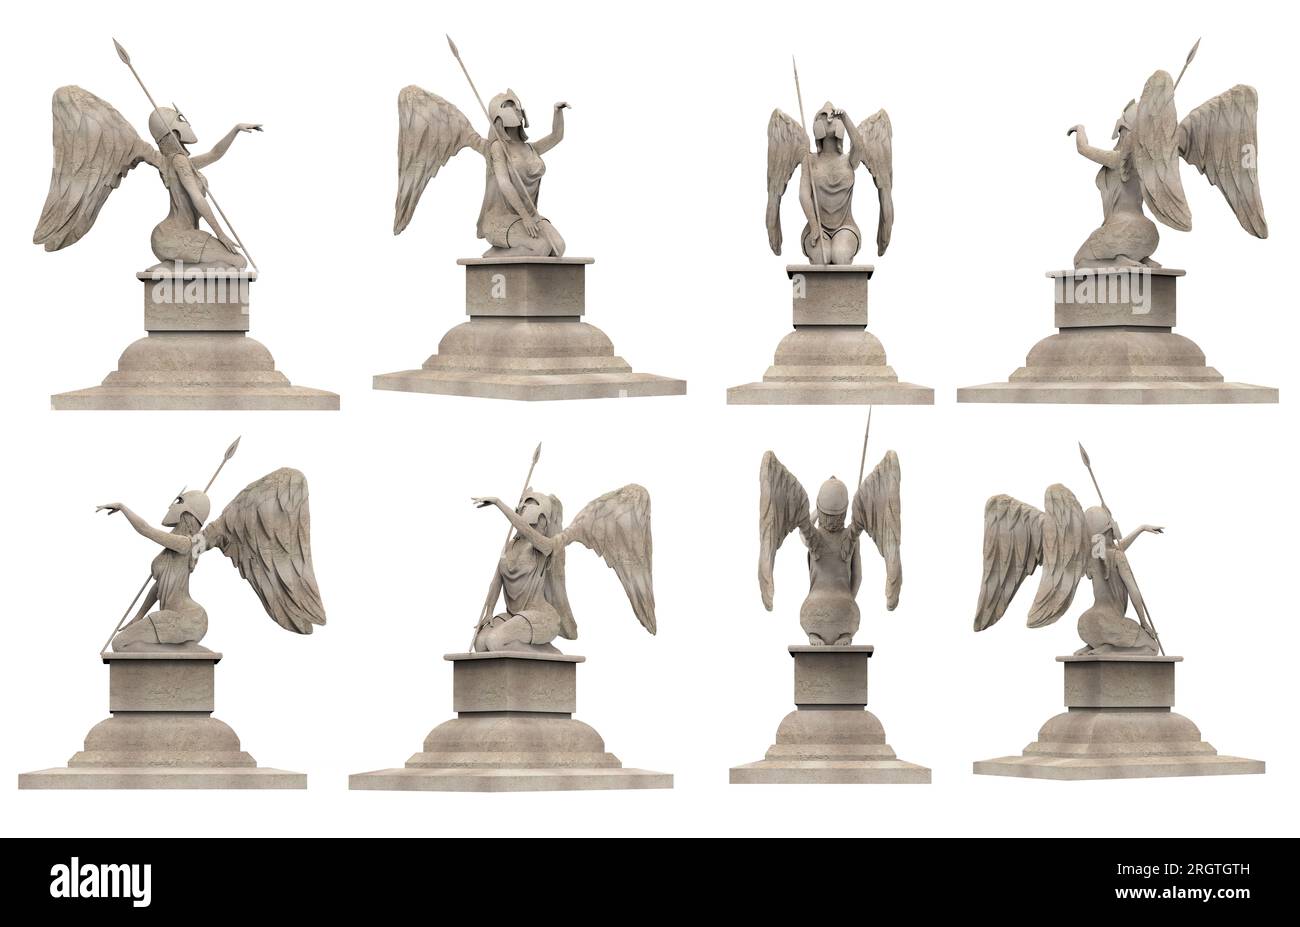 Isolated 3d render illustration of antique ancient stone guardian angel warrior statue on pedestal sitting with spear, various angles. Stock Photo